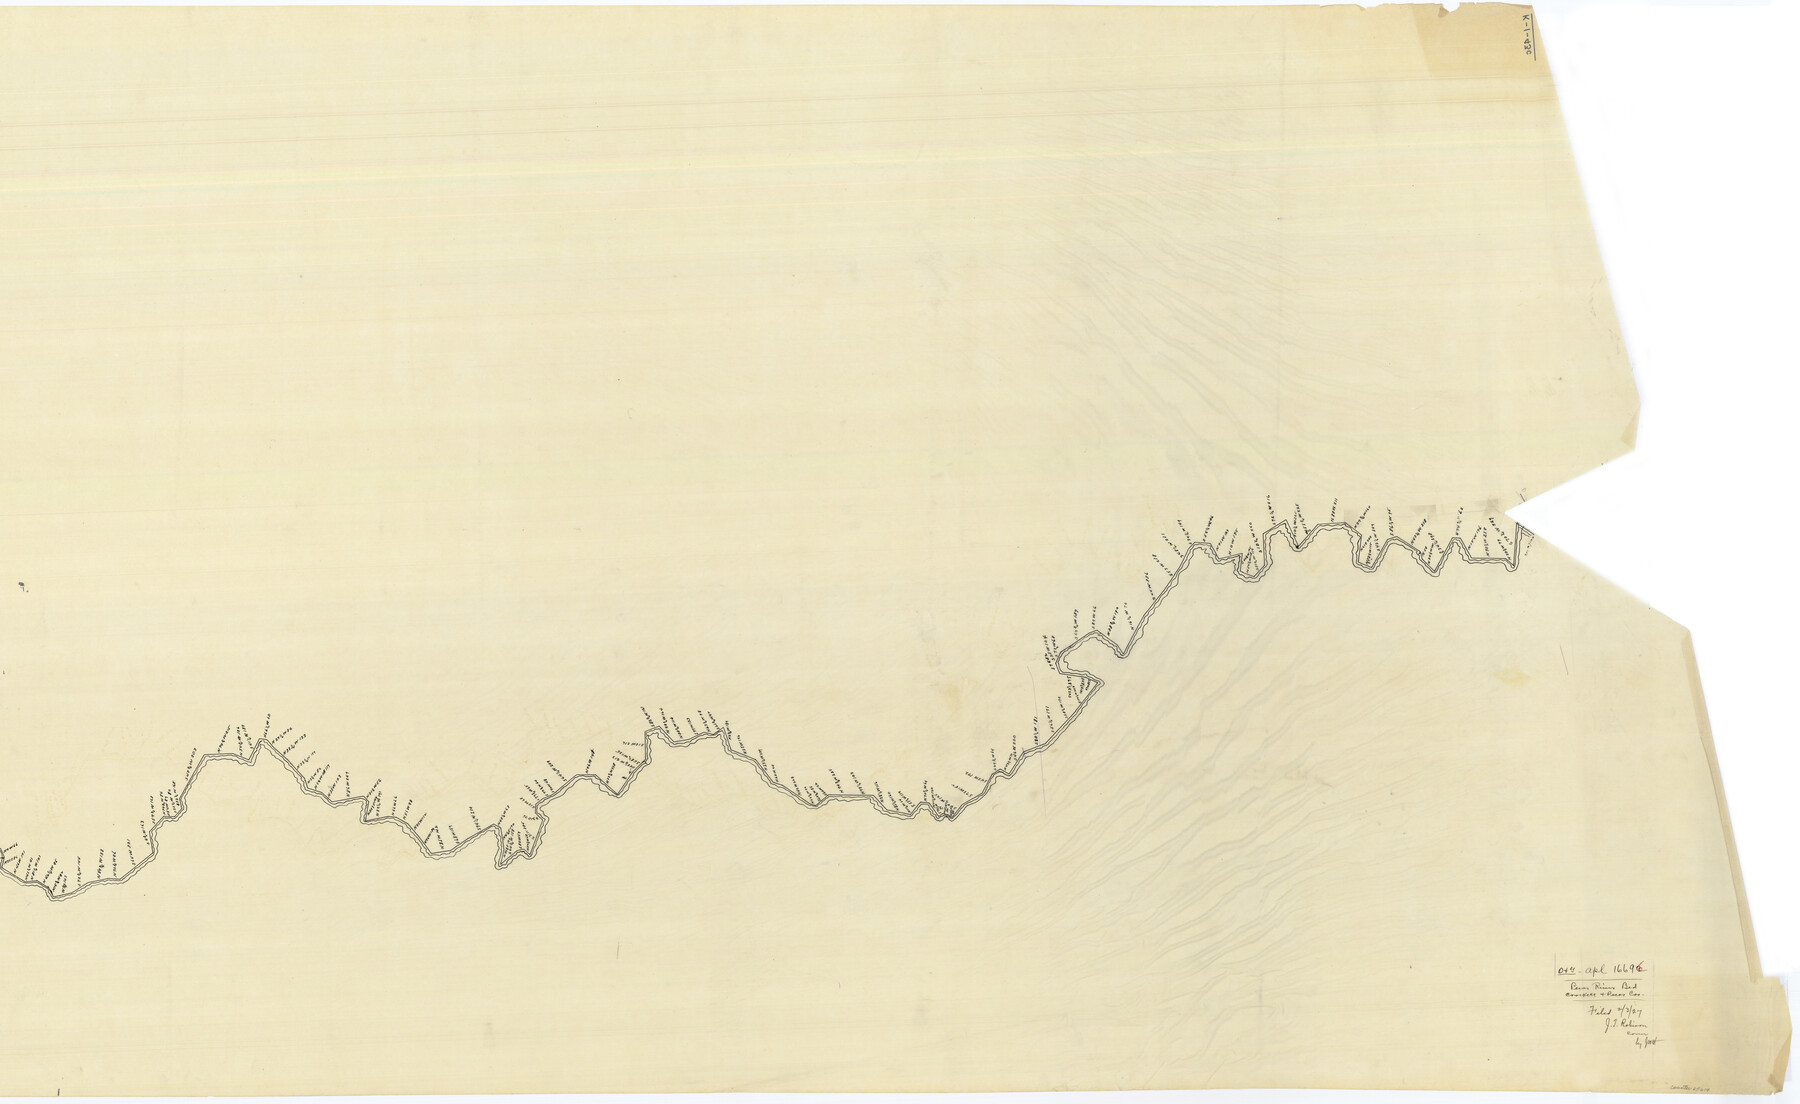 65614, [Sketch for Mineral Application 16696-16697, Pecos River], General Map Collection